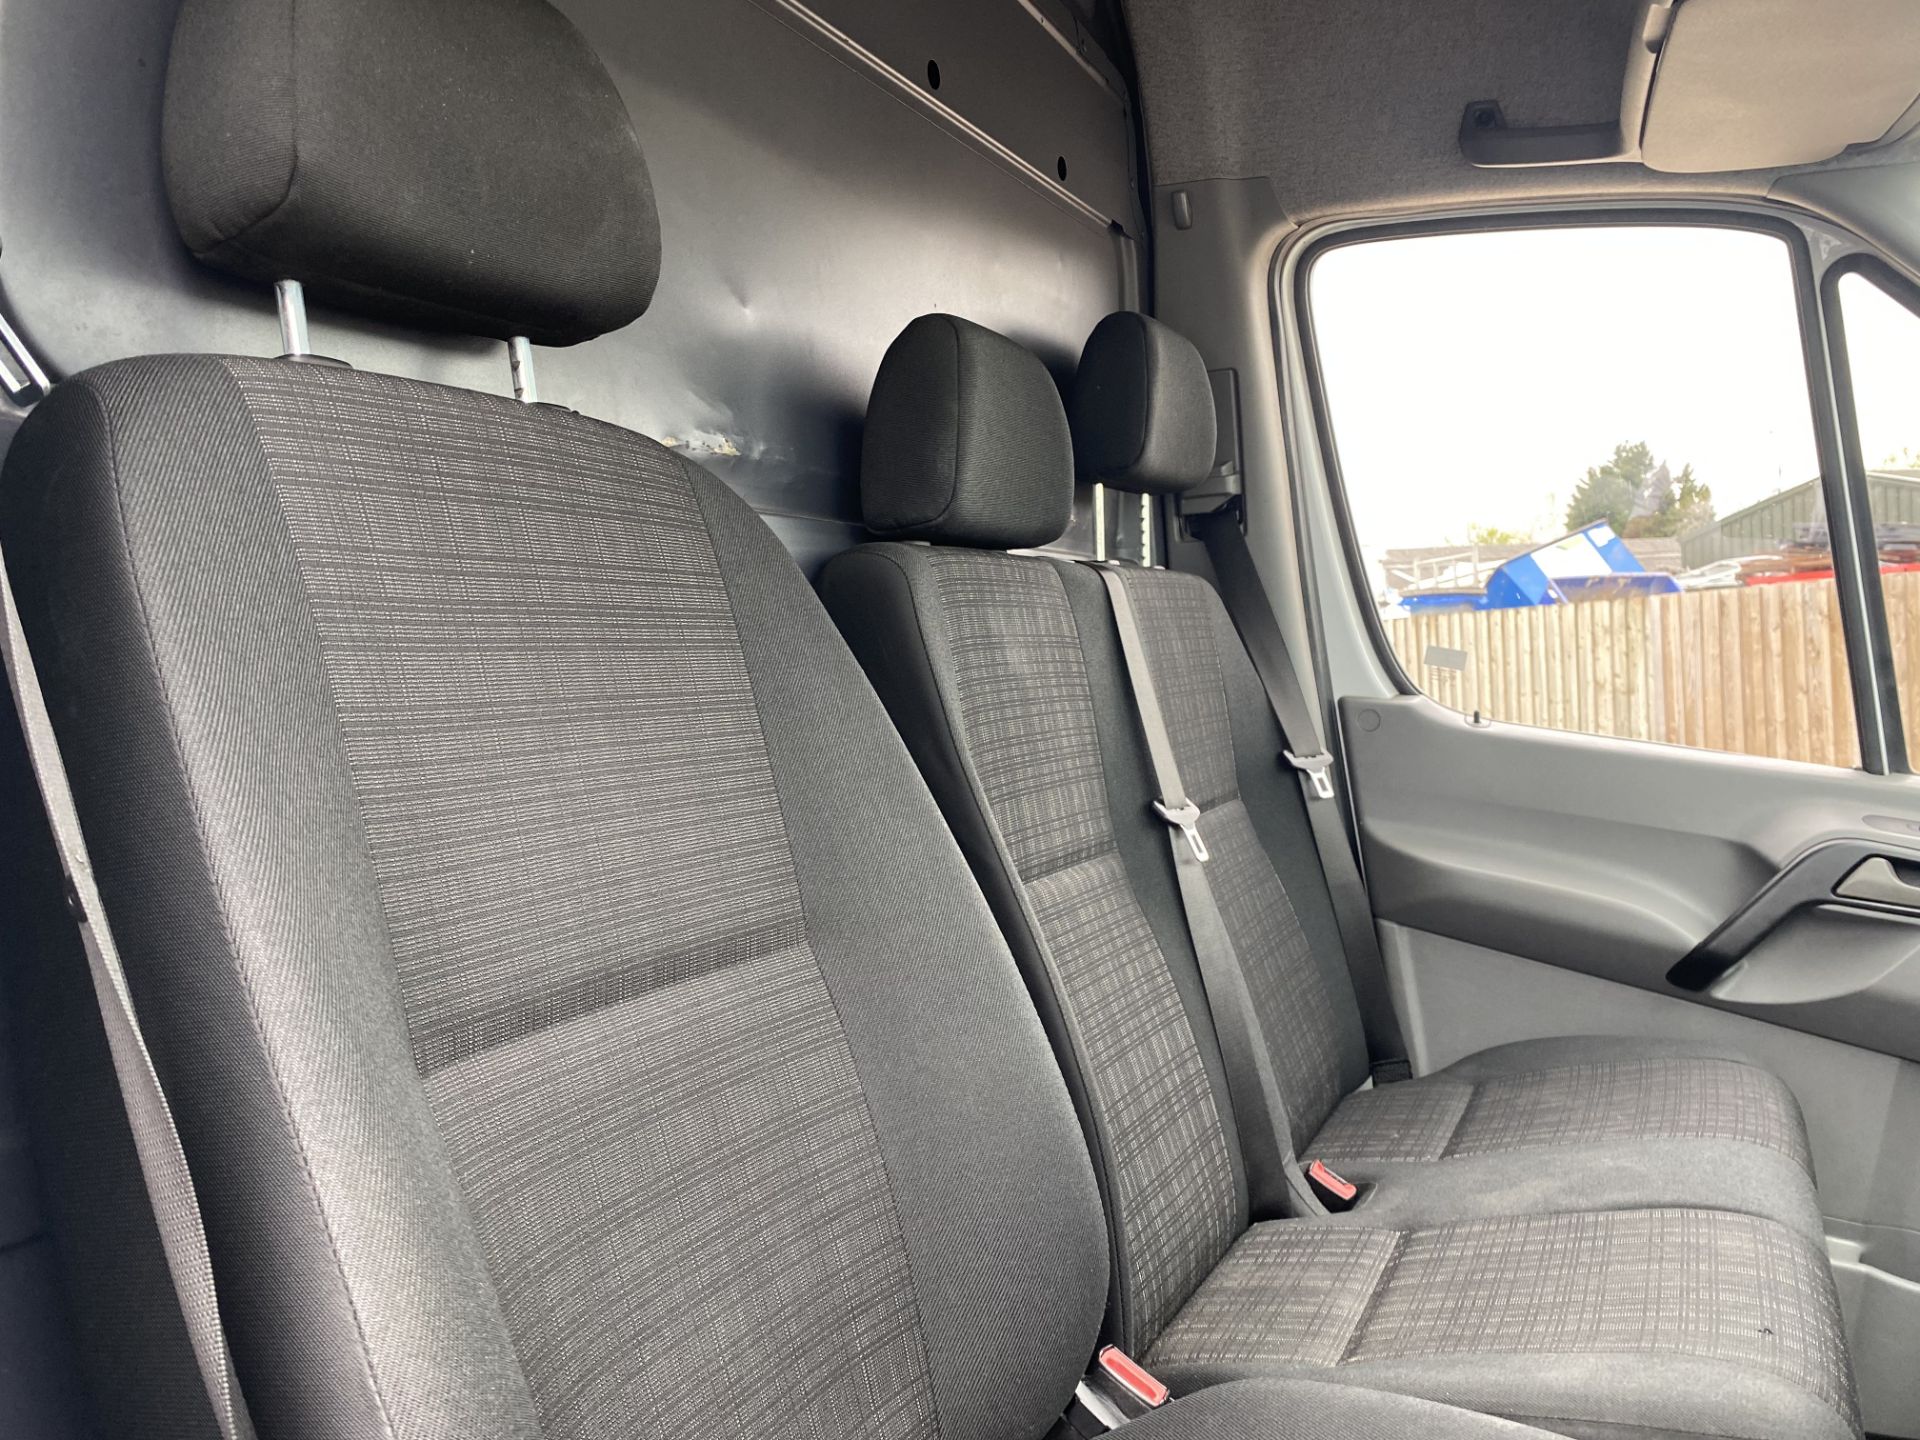 MERCEDES SPRINTER 314CDI "LWB" HIGH ROOF WITH FULL ELECTRIC TAIL-LIFT - 2018 MODEL - 1 OWNER - FSH - Image 17 of 18